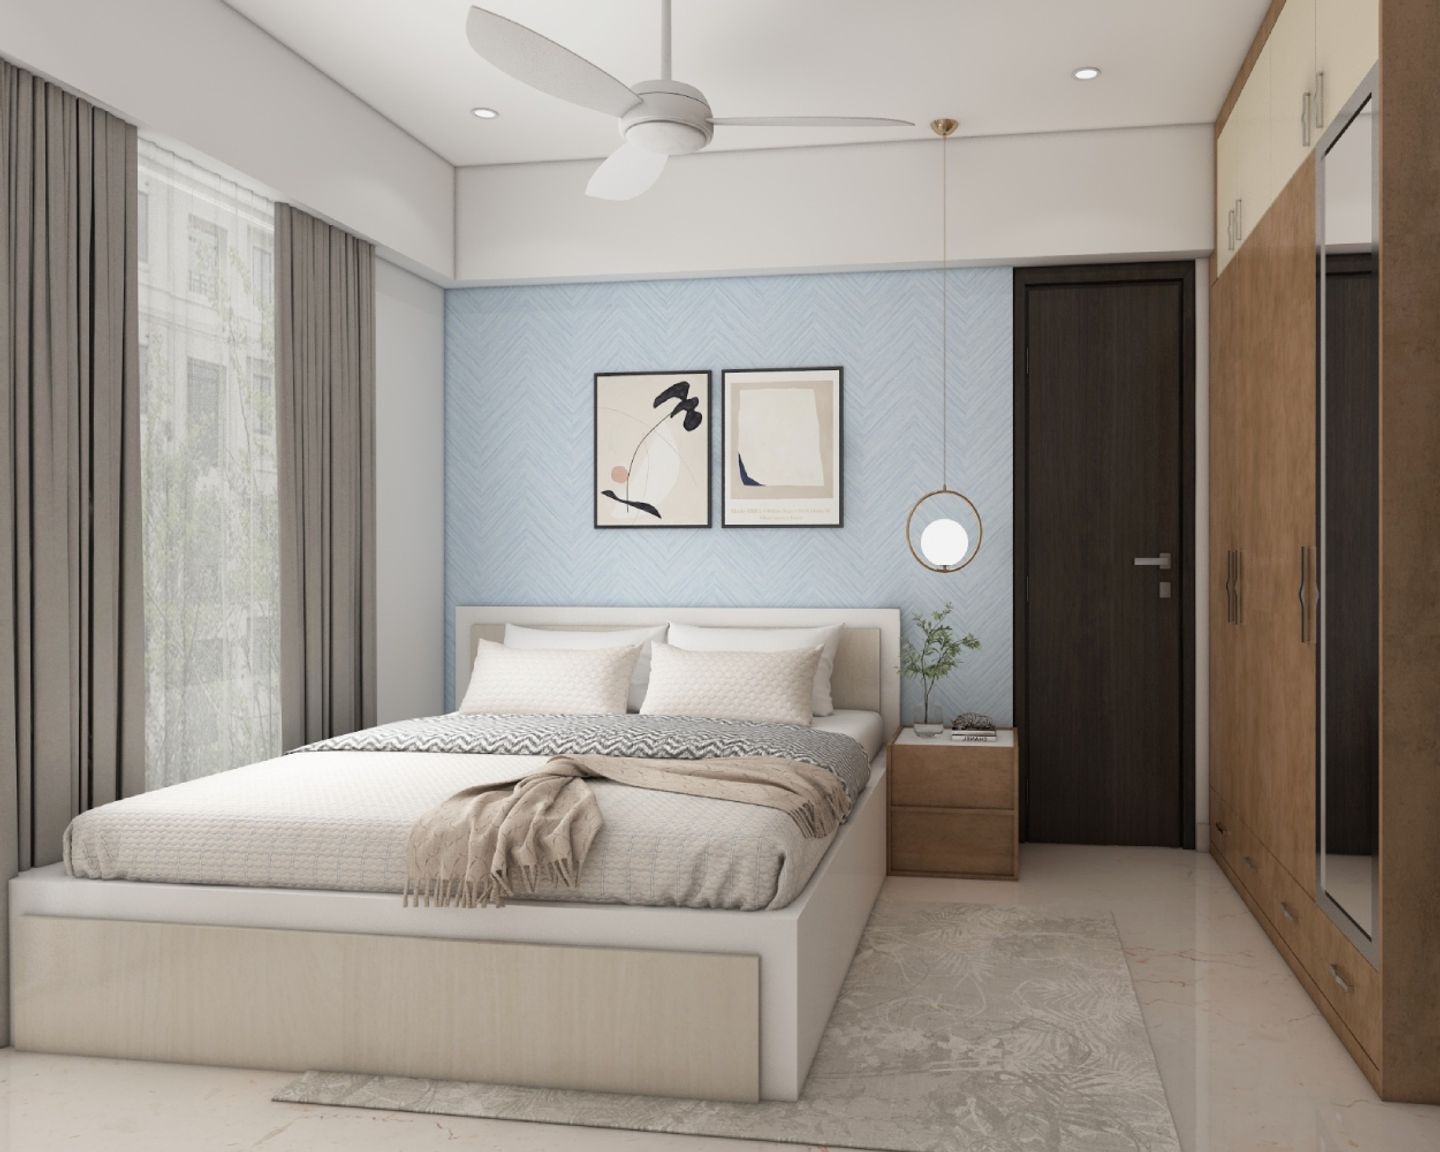 Modern Guest Bedroom With White Bed, 3-Door Wooden Swing Wardrobe And Light Blue Accent Wall - Livspace